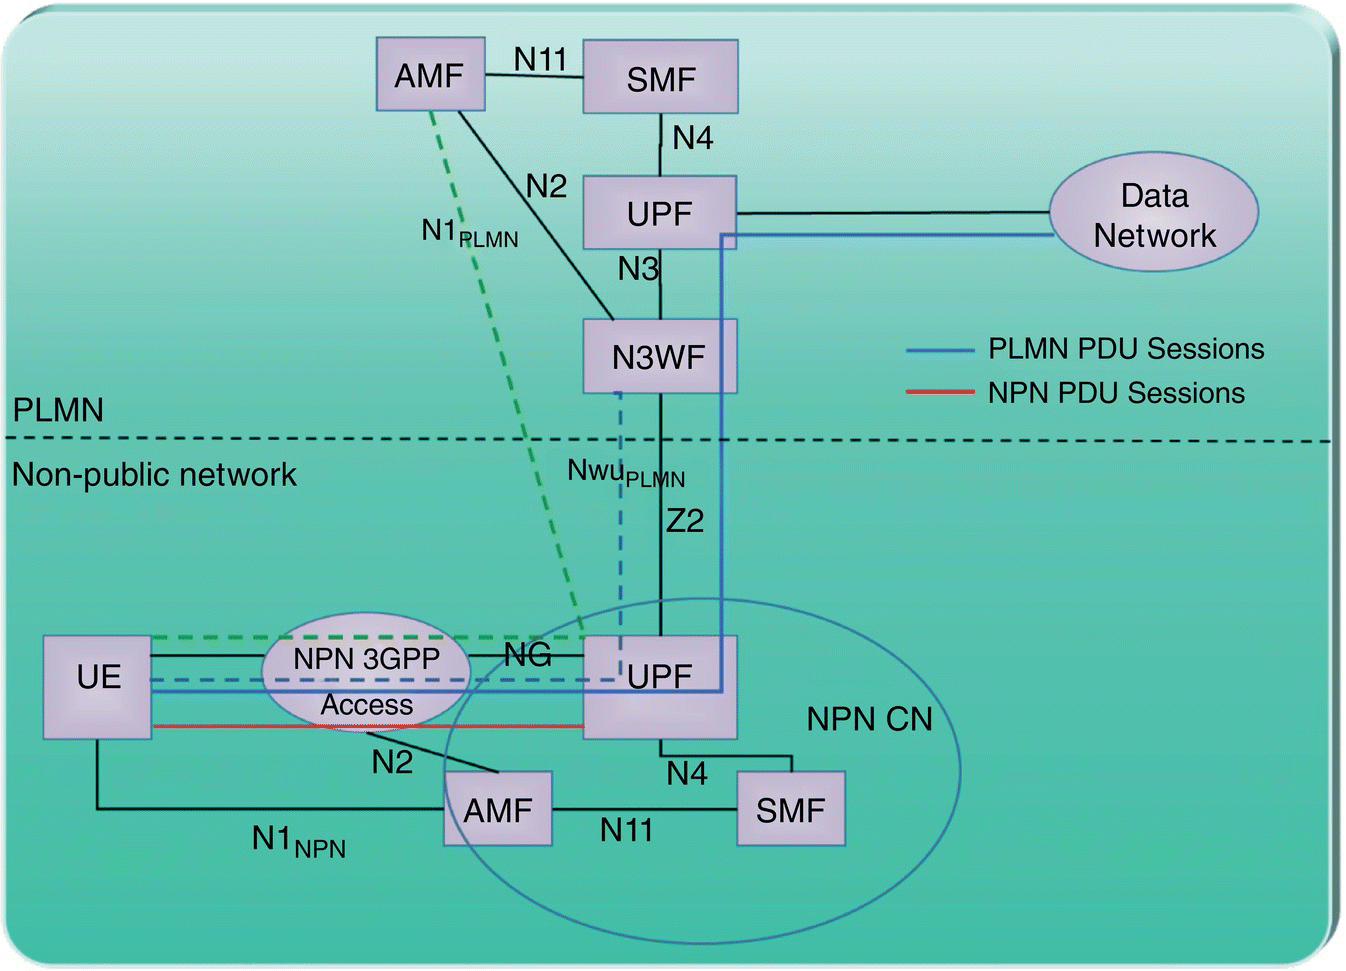 Schematic of service continuity architecture and solution with boxes labeled AMF, SMF, UPF, N3WF, and UE and ellipses labeled Data Network and NPN 3GPP Access that are linked by lines for PLMN PDU and NPN PDU sessions.